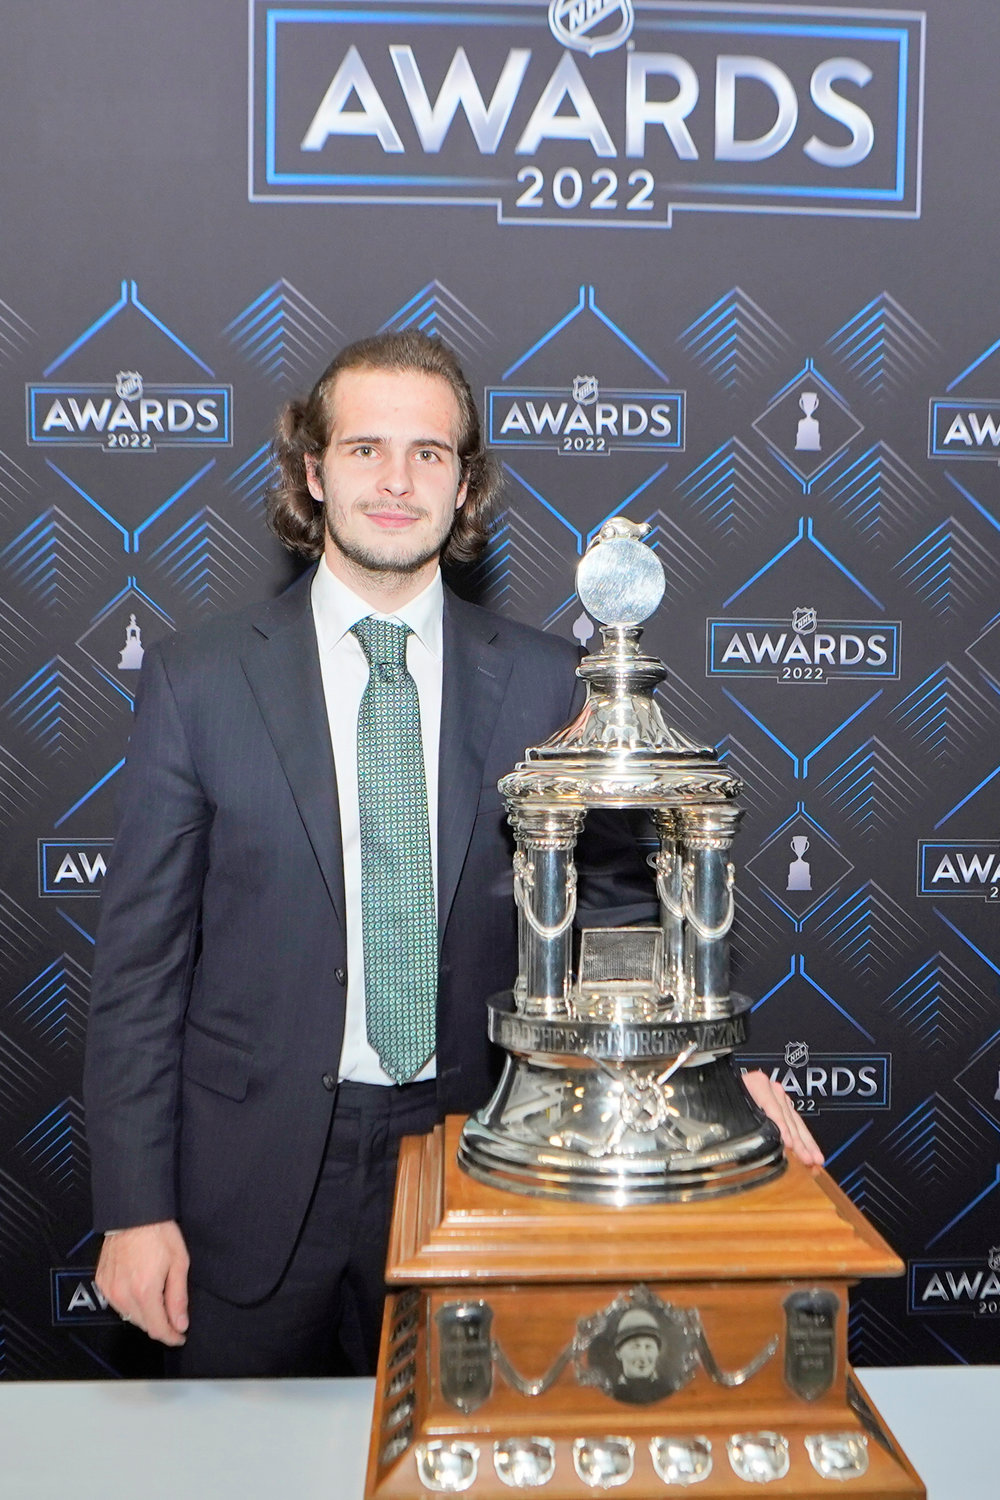 New York Rangers goalie Igor Shesterkin poses with the Vezina Trophy after the NHL awards Tuesday night in Tampa, Fla. The Vezina Trophy is presented annually to the leagues’ best goalie.